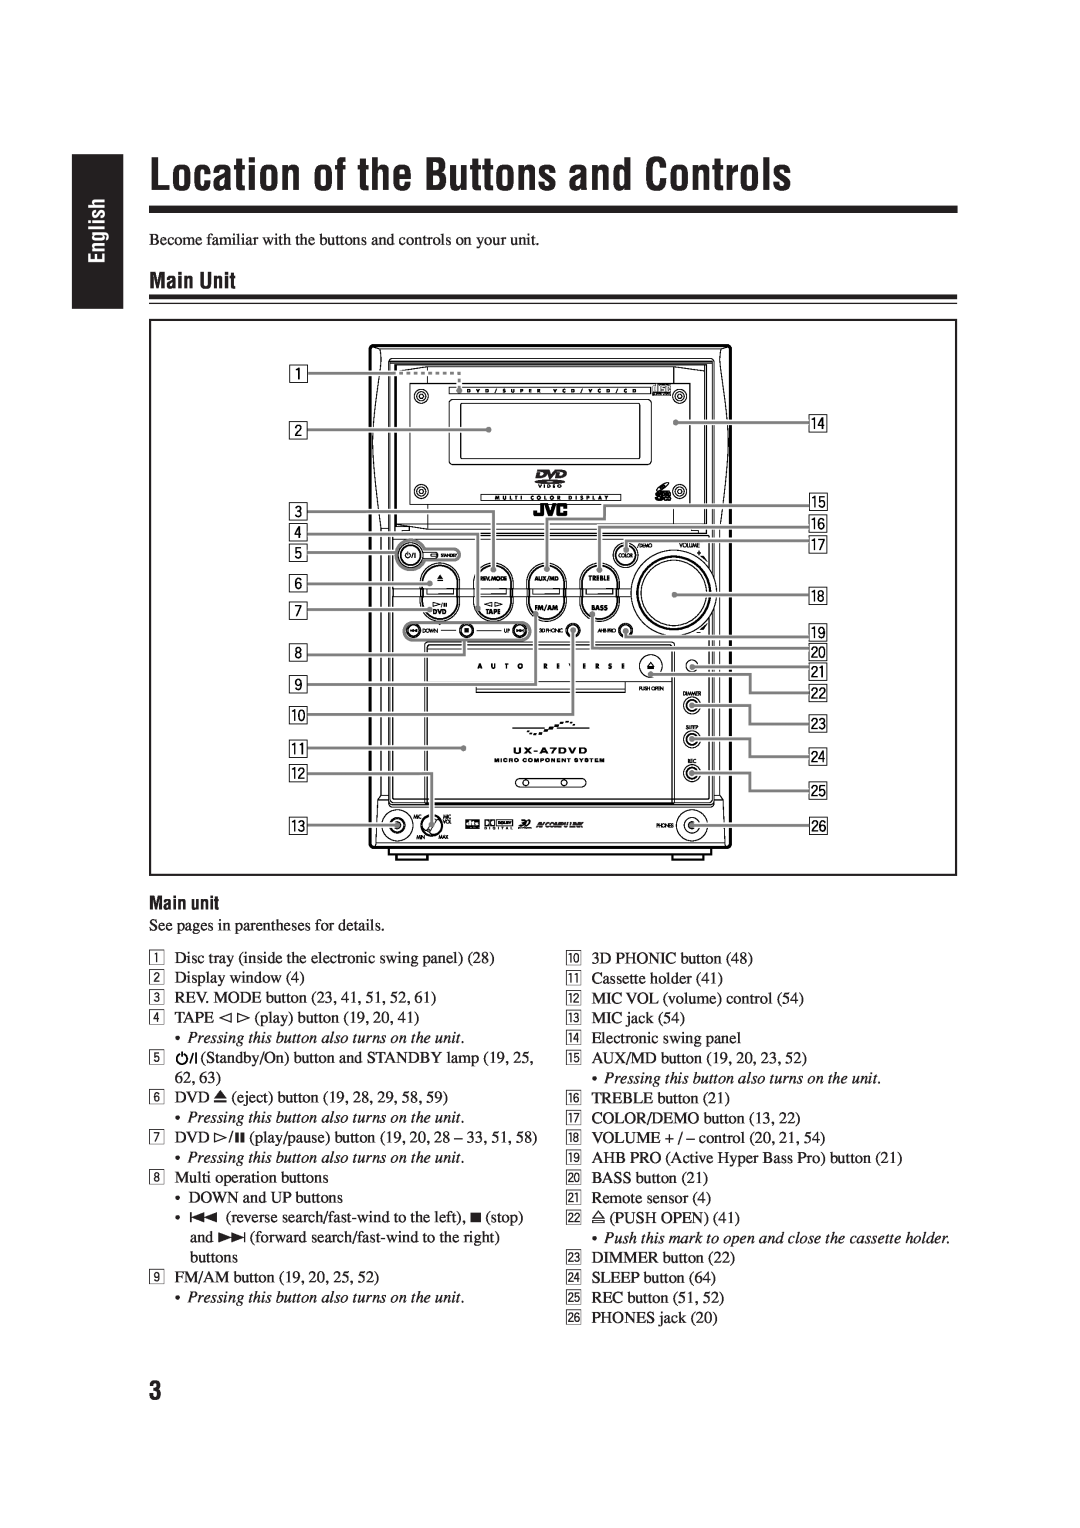 JVC LVT0954-007A manual Location of the Buttons and Controls, Main Unit, English 